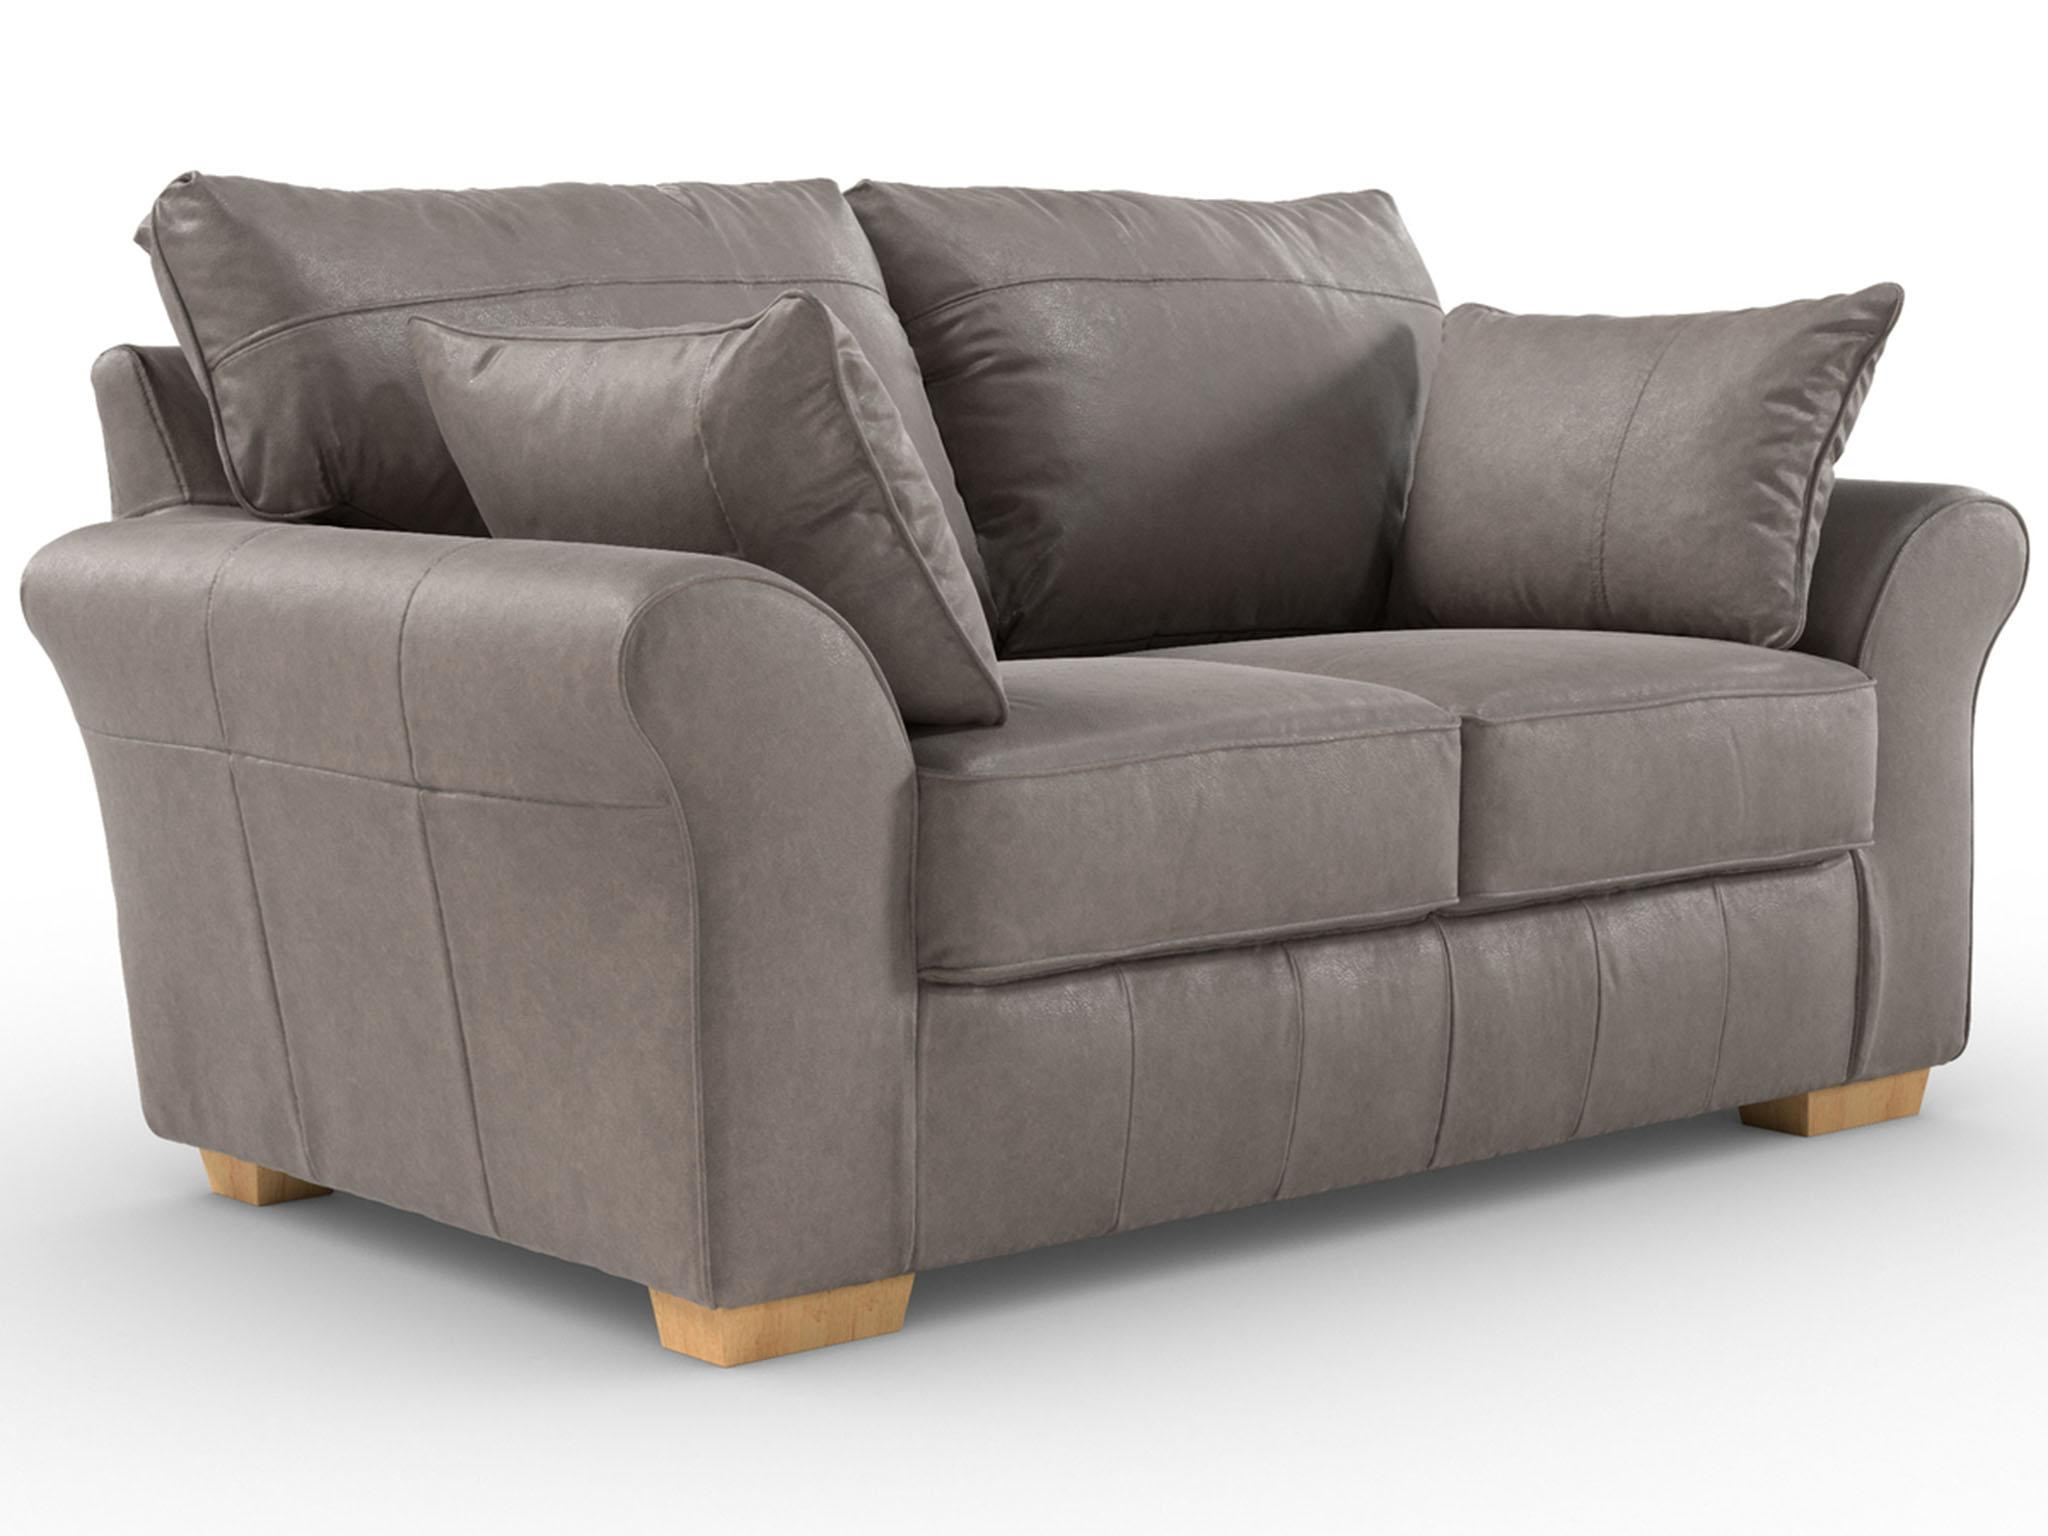 leather sofa bed next day delivery